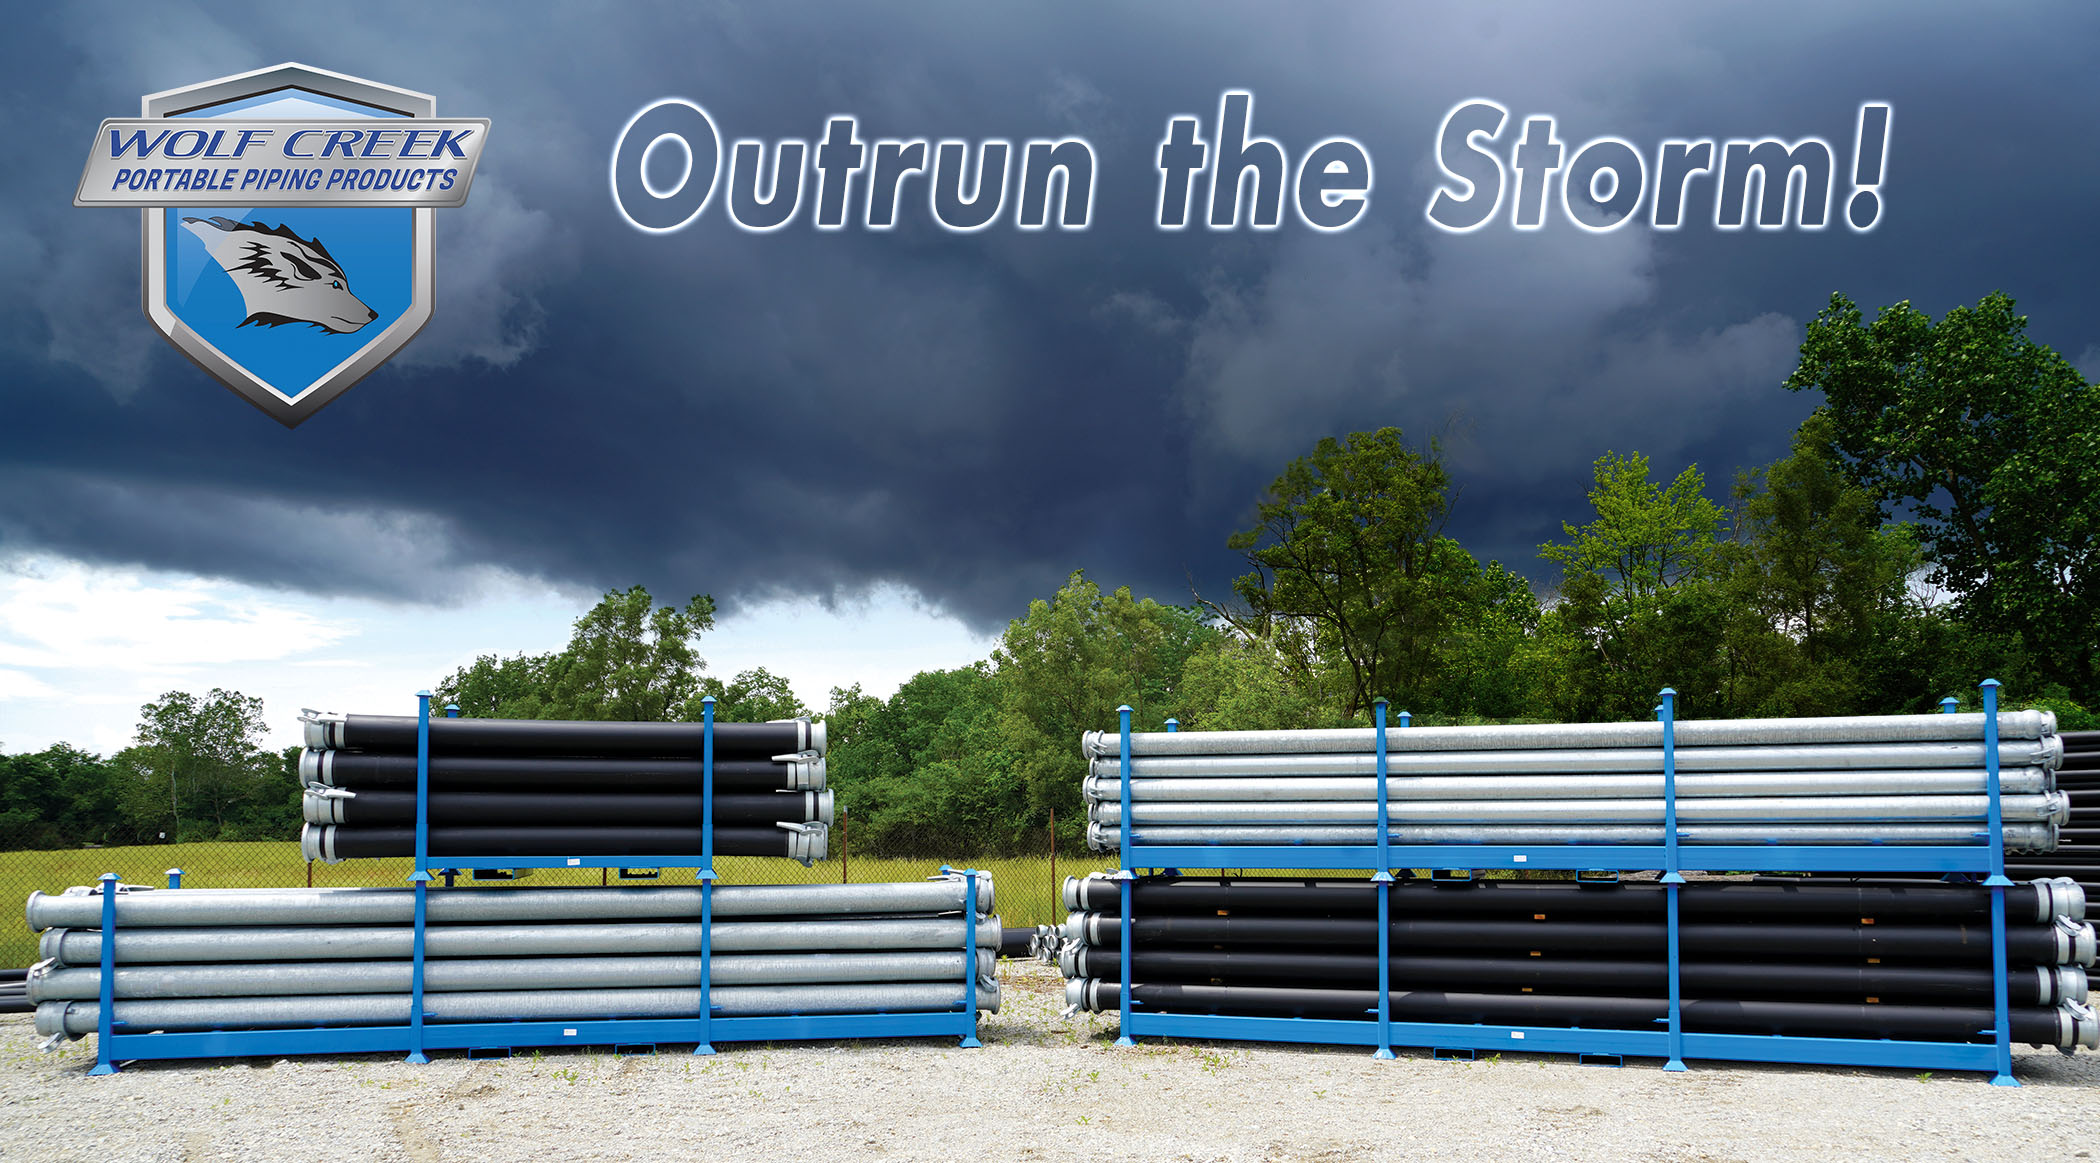 outrun the storm with Wolf Creek's Portable Piping